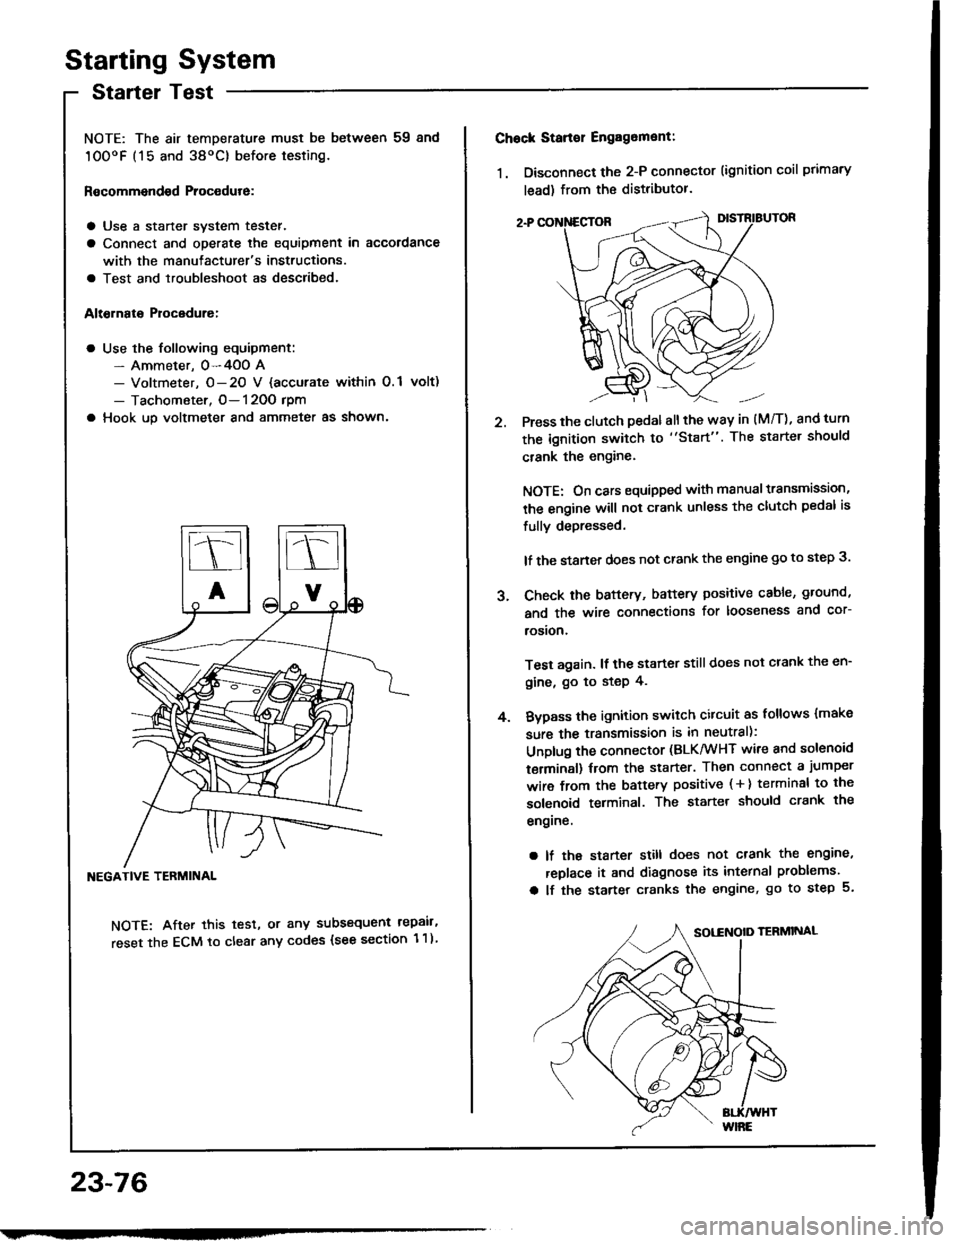 ACURA INTEGRA 1994  Service Repair Manual Starting System
Startel Test
NOTE: The air temDerature must be between 59 8nd
10OoF (15 and 38oC) before testing.
Recommendsd Procodure:
a Use a staner svstem tester.
a Connect and operate the equipme